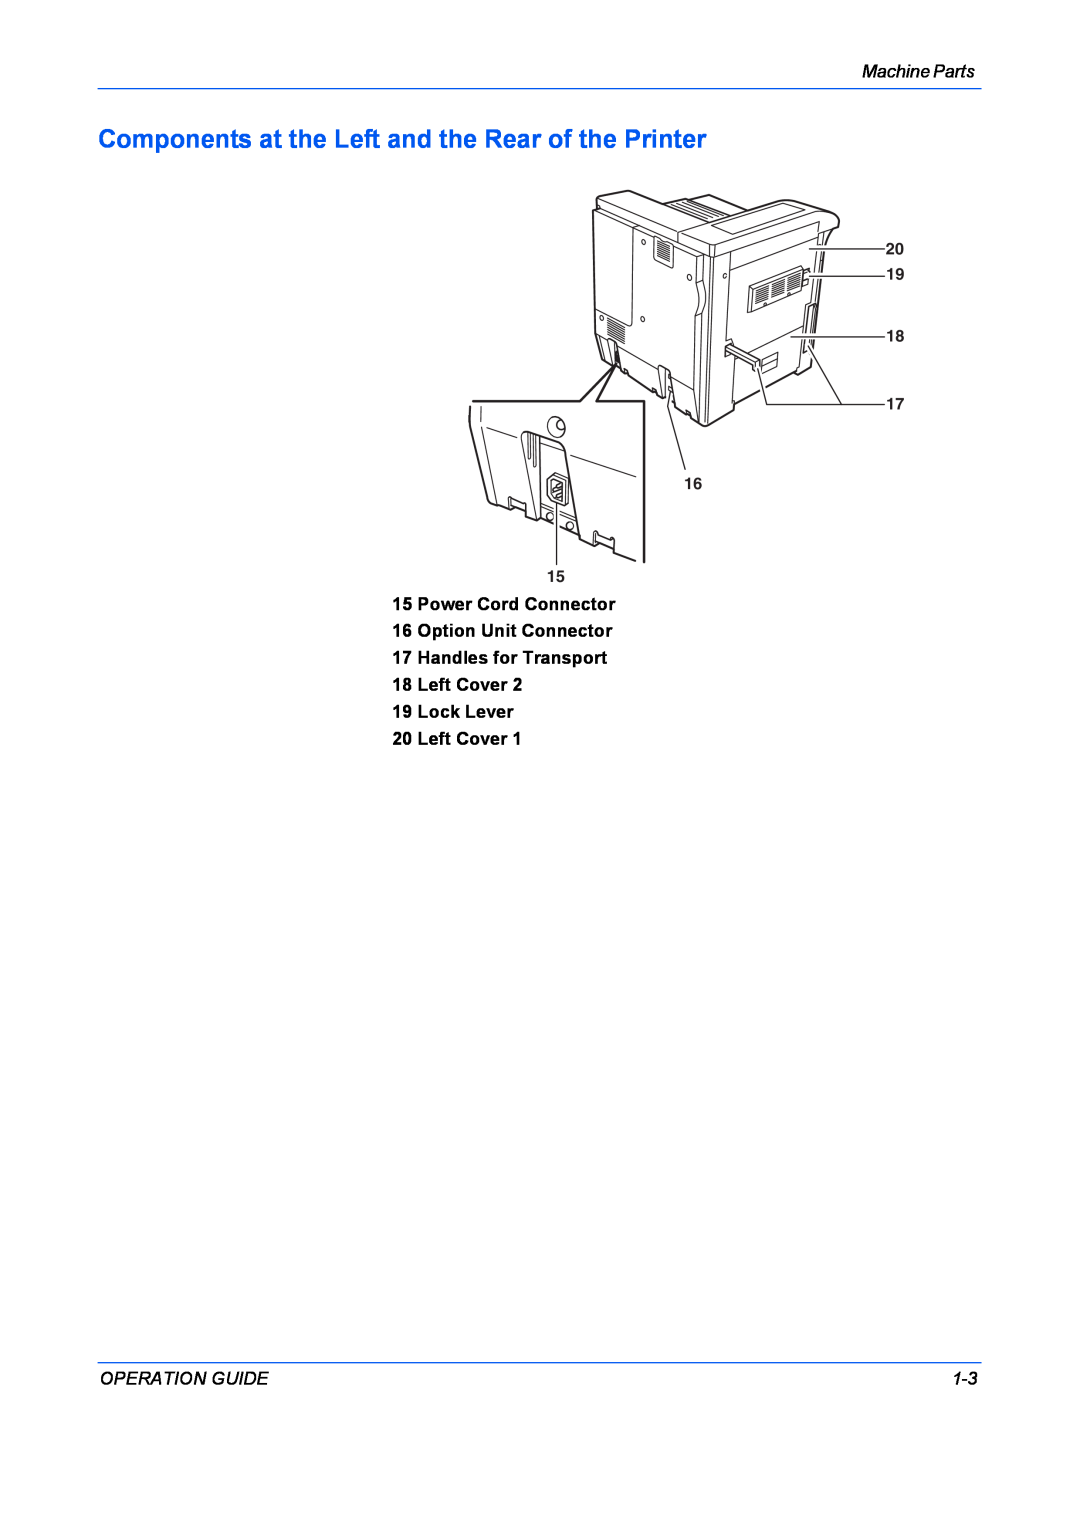 Kyocera FS-9130DN, FS-9530DN manual Components at the Left and the Rear of the Printer, Machine Parts, Operation Guide 